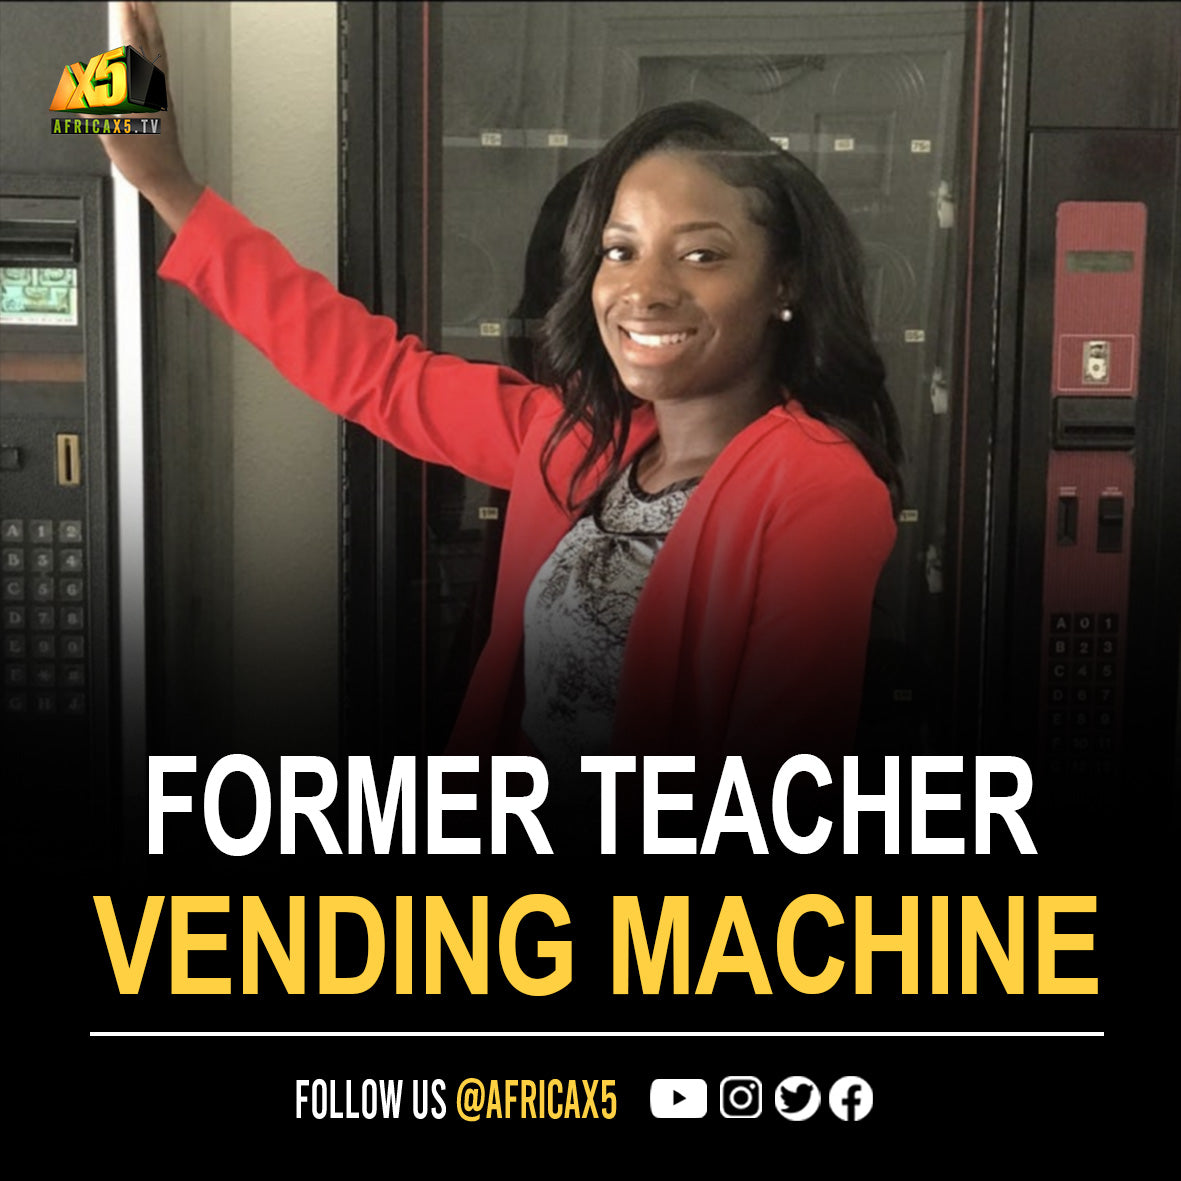 MEET THE FORMER TEACHER WHO BUILT A $242,000 PER YEAR VENDING MACHINE COMPANY WITH $650